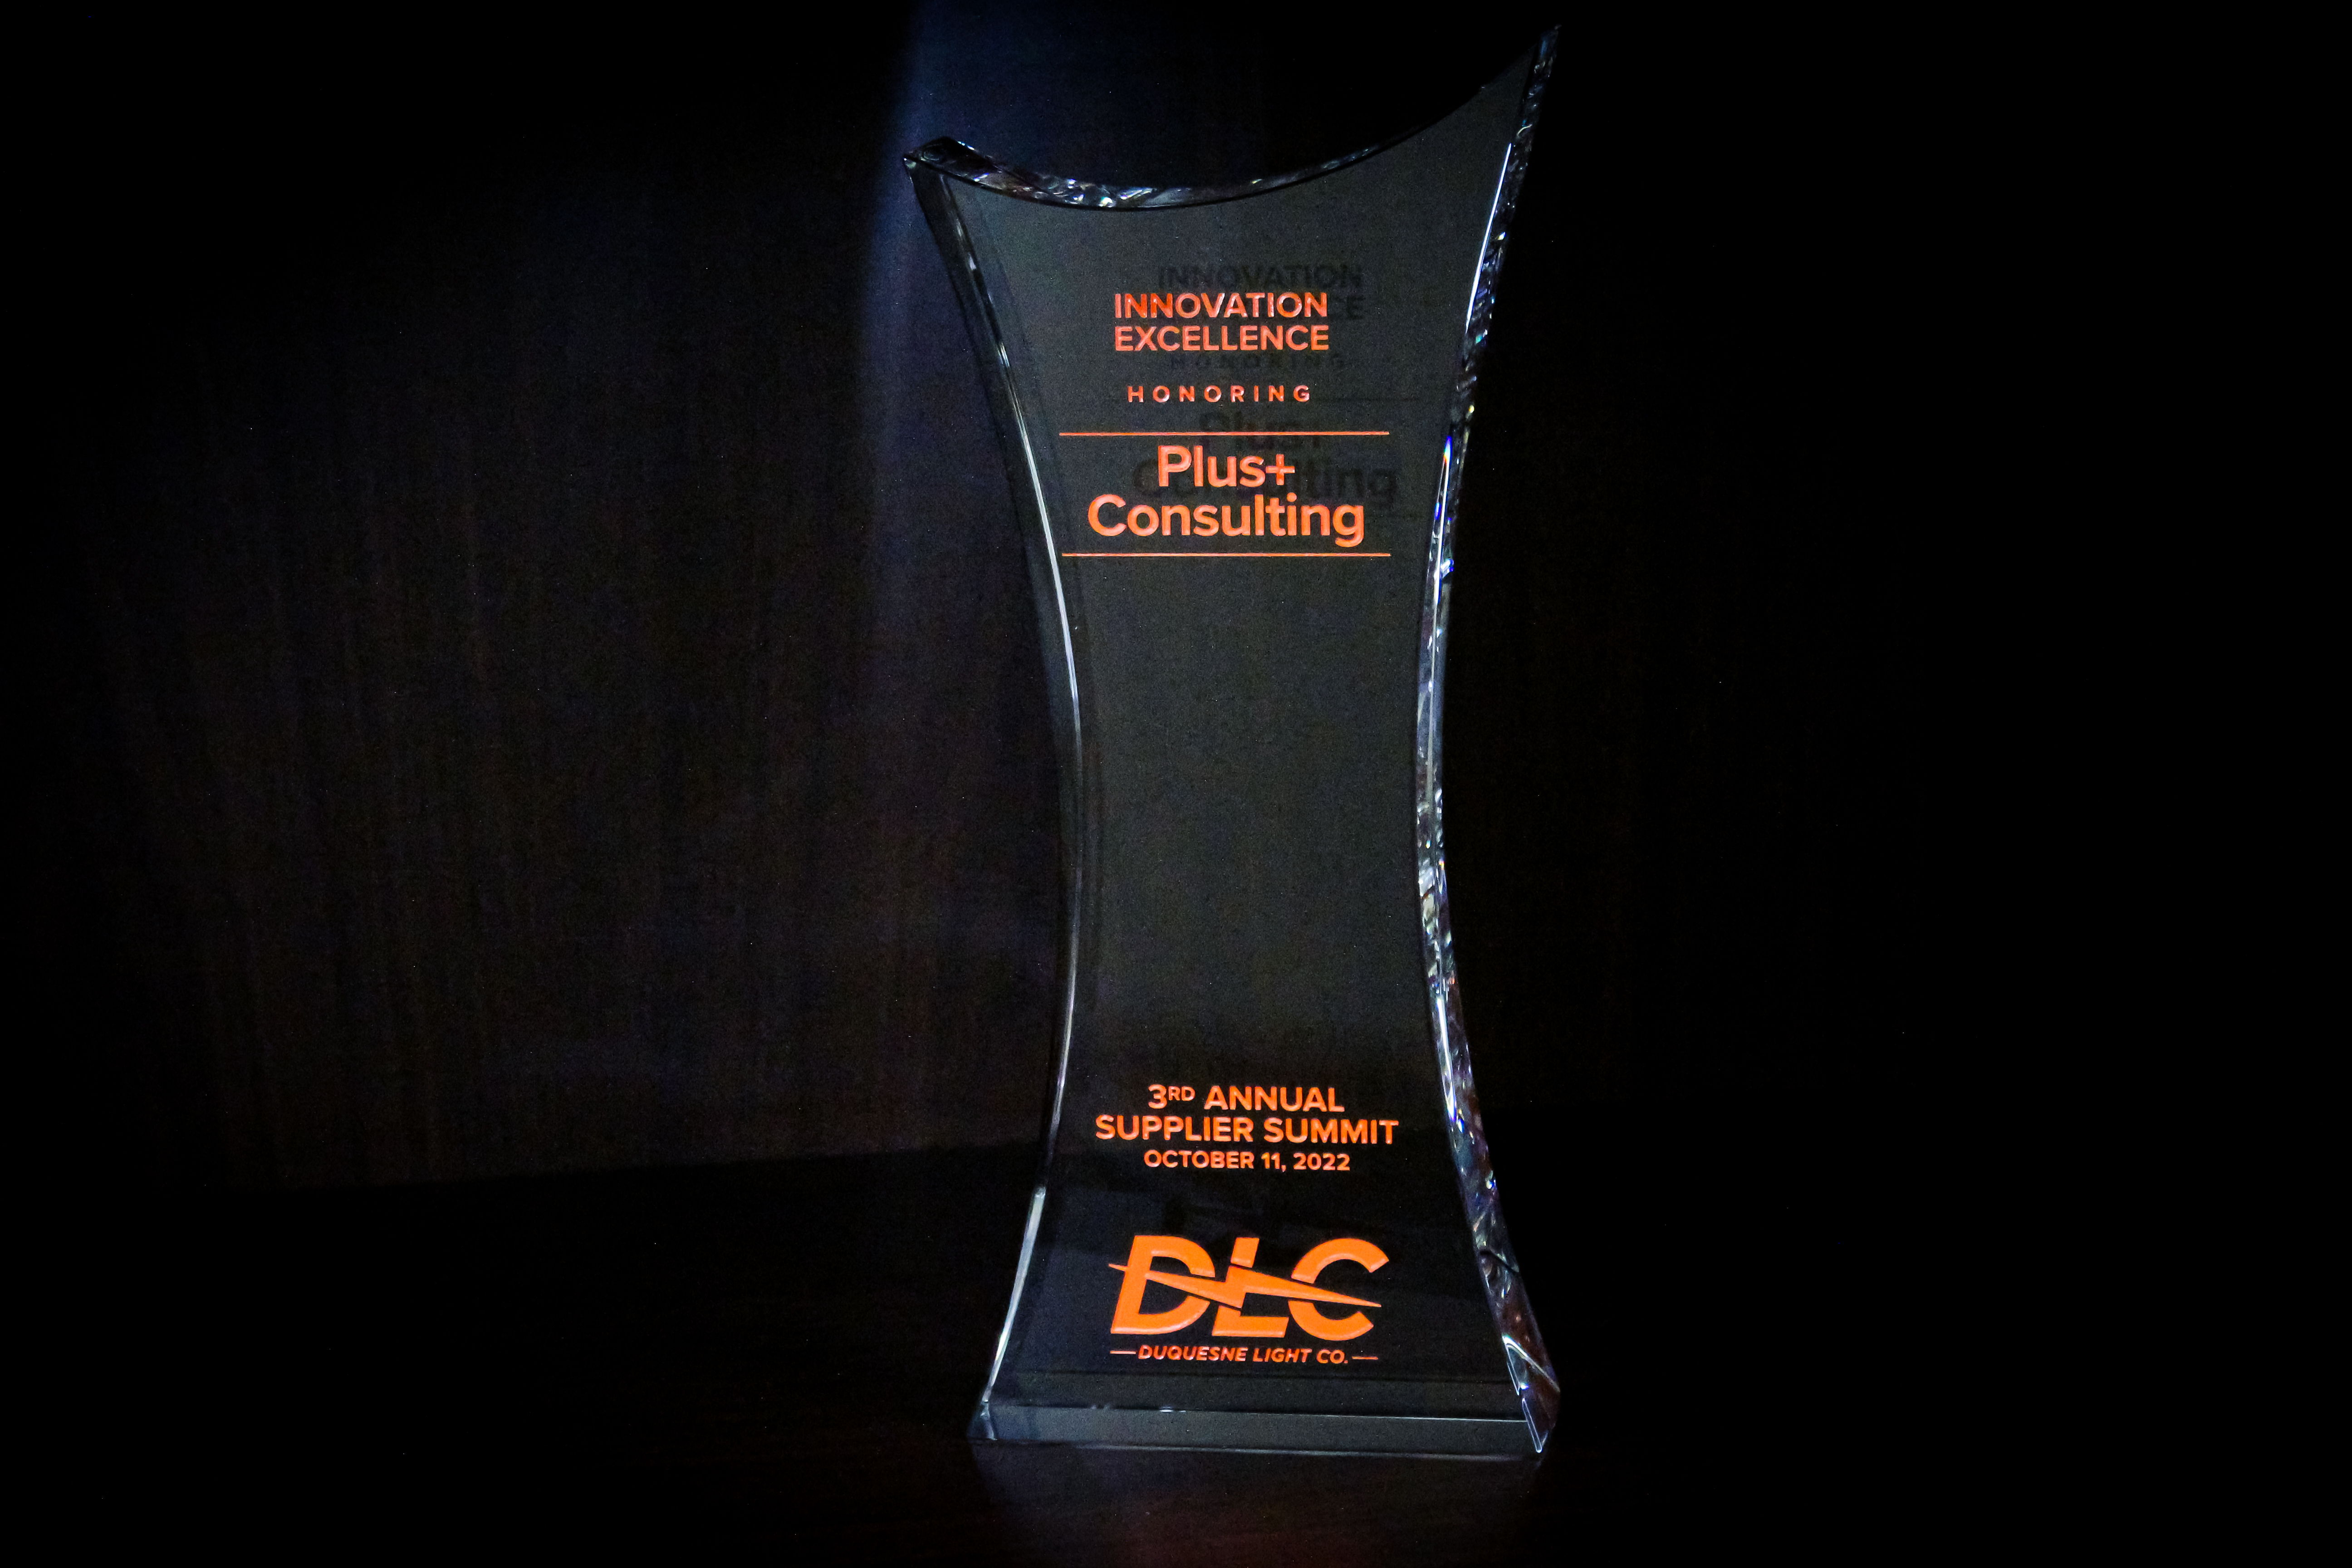 Plus+ Consulting won DLC's Supplier Summit award for Innovation Excellence.